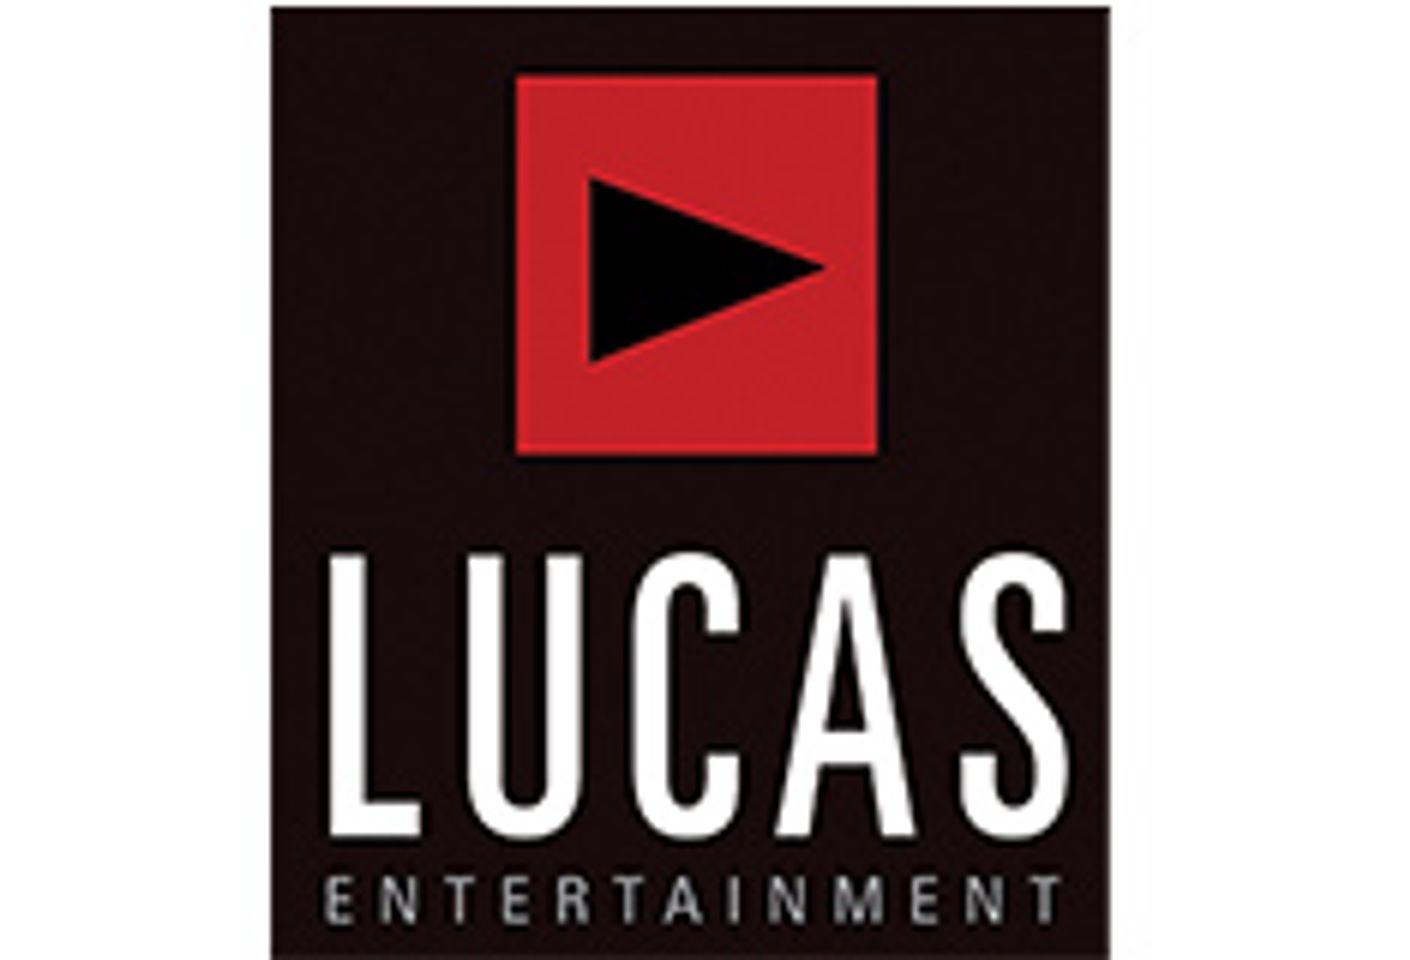 Lucas Entertainment Signs Three New Exclusives